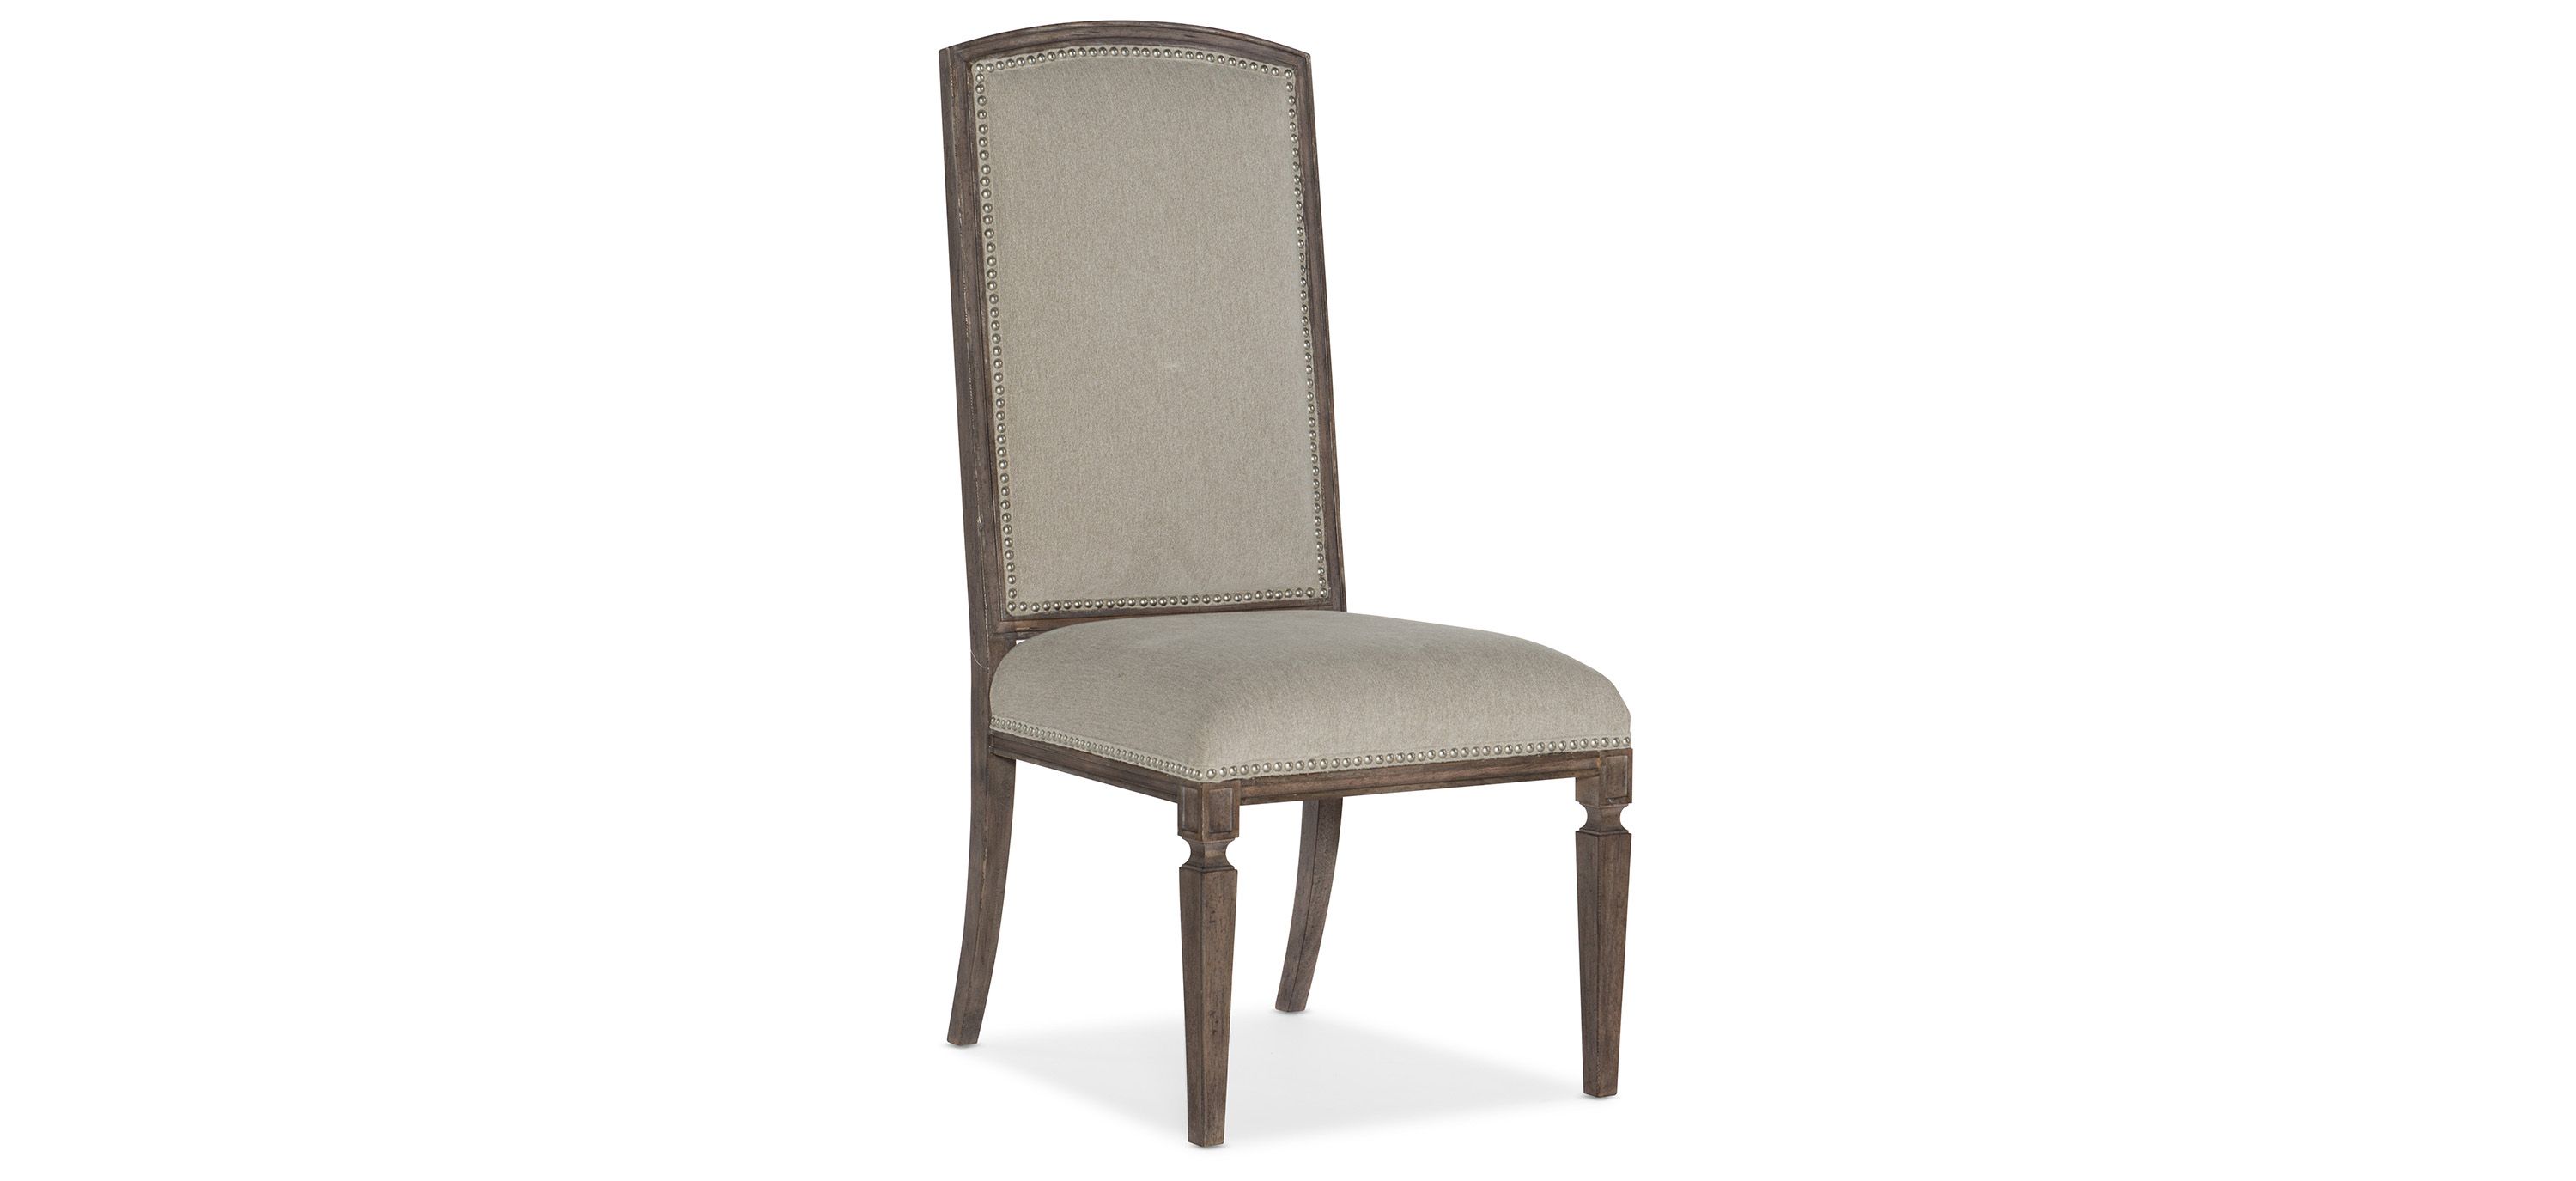 Woodlands Arched Upholstered Side Chair - Set of 2